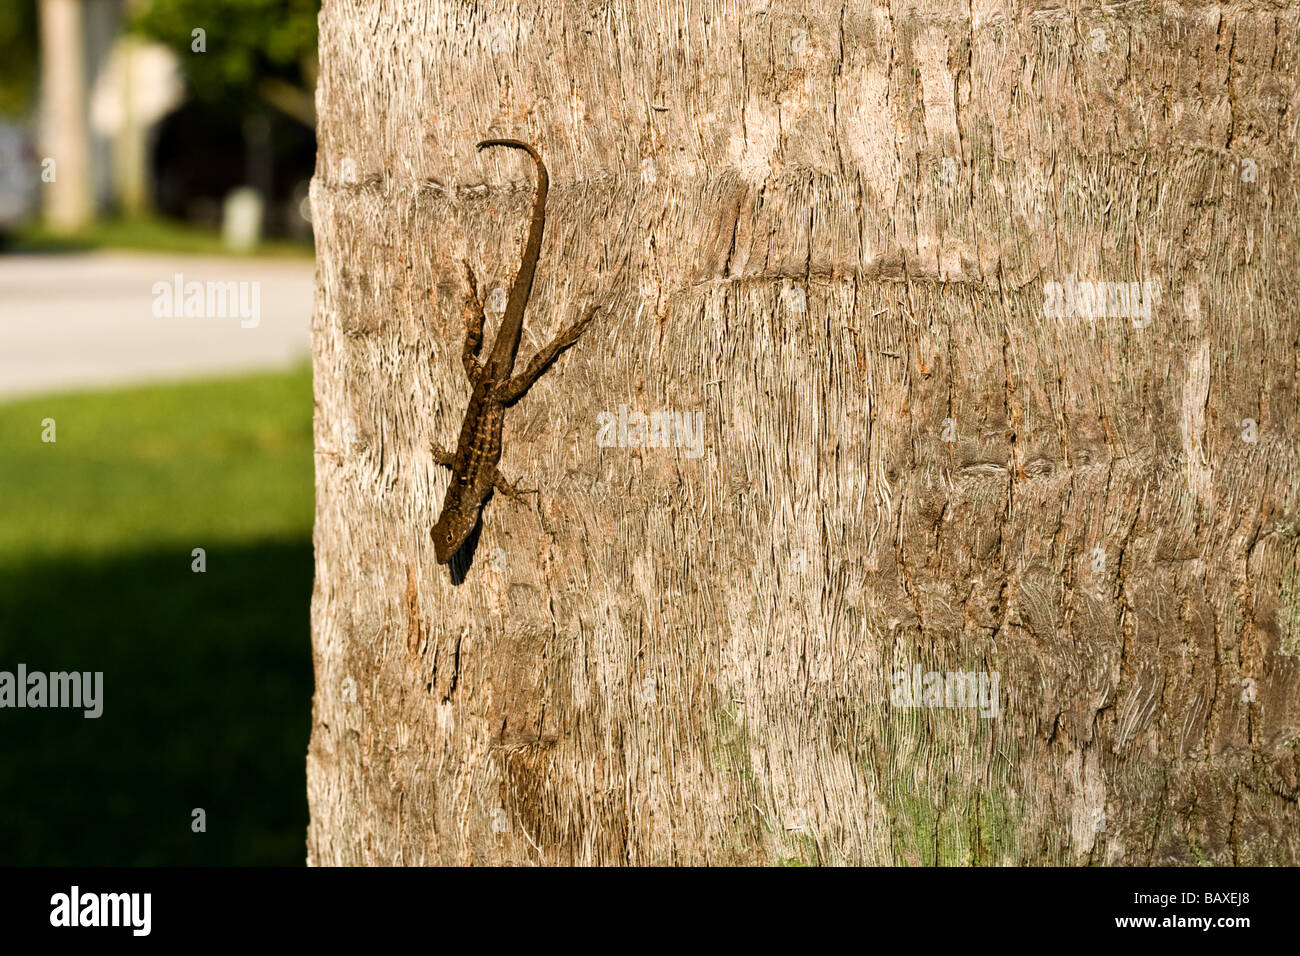 Small lizard on teh trunk of a tree Stock Photo